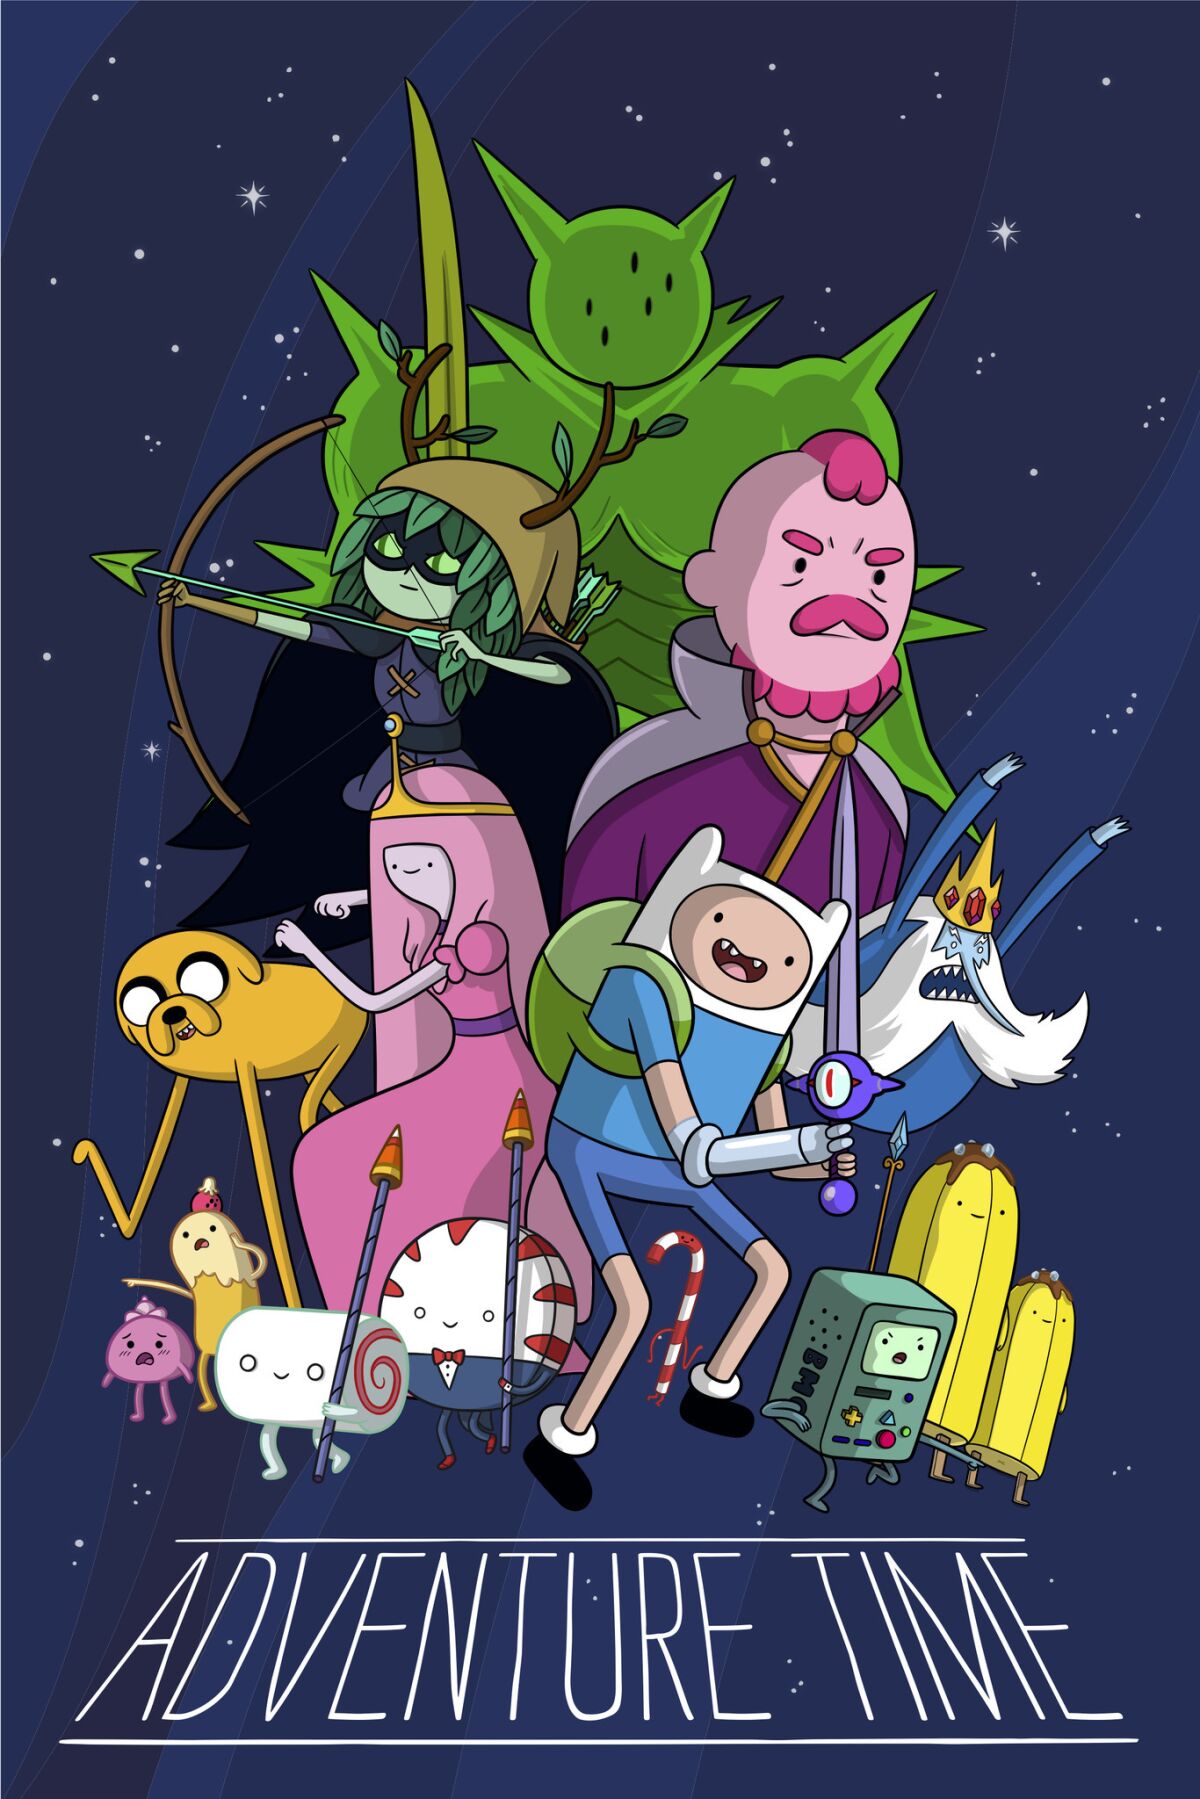 A promotional image for the series finale of "Adventure Time" on Cartoon Network.